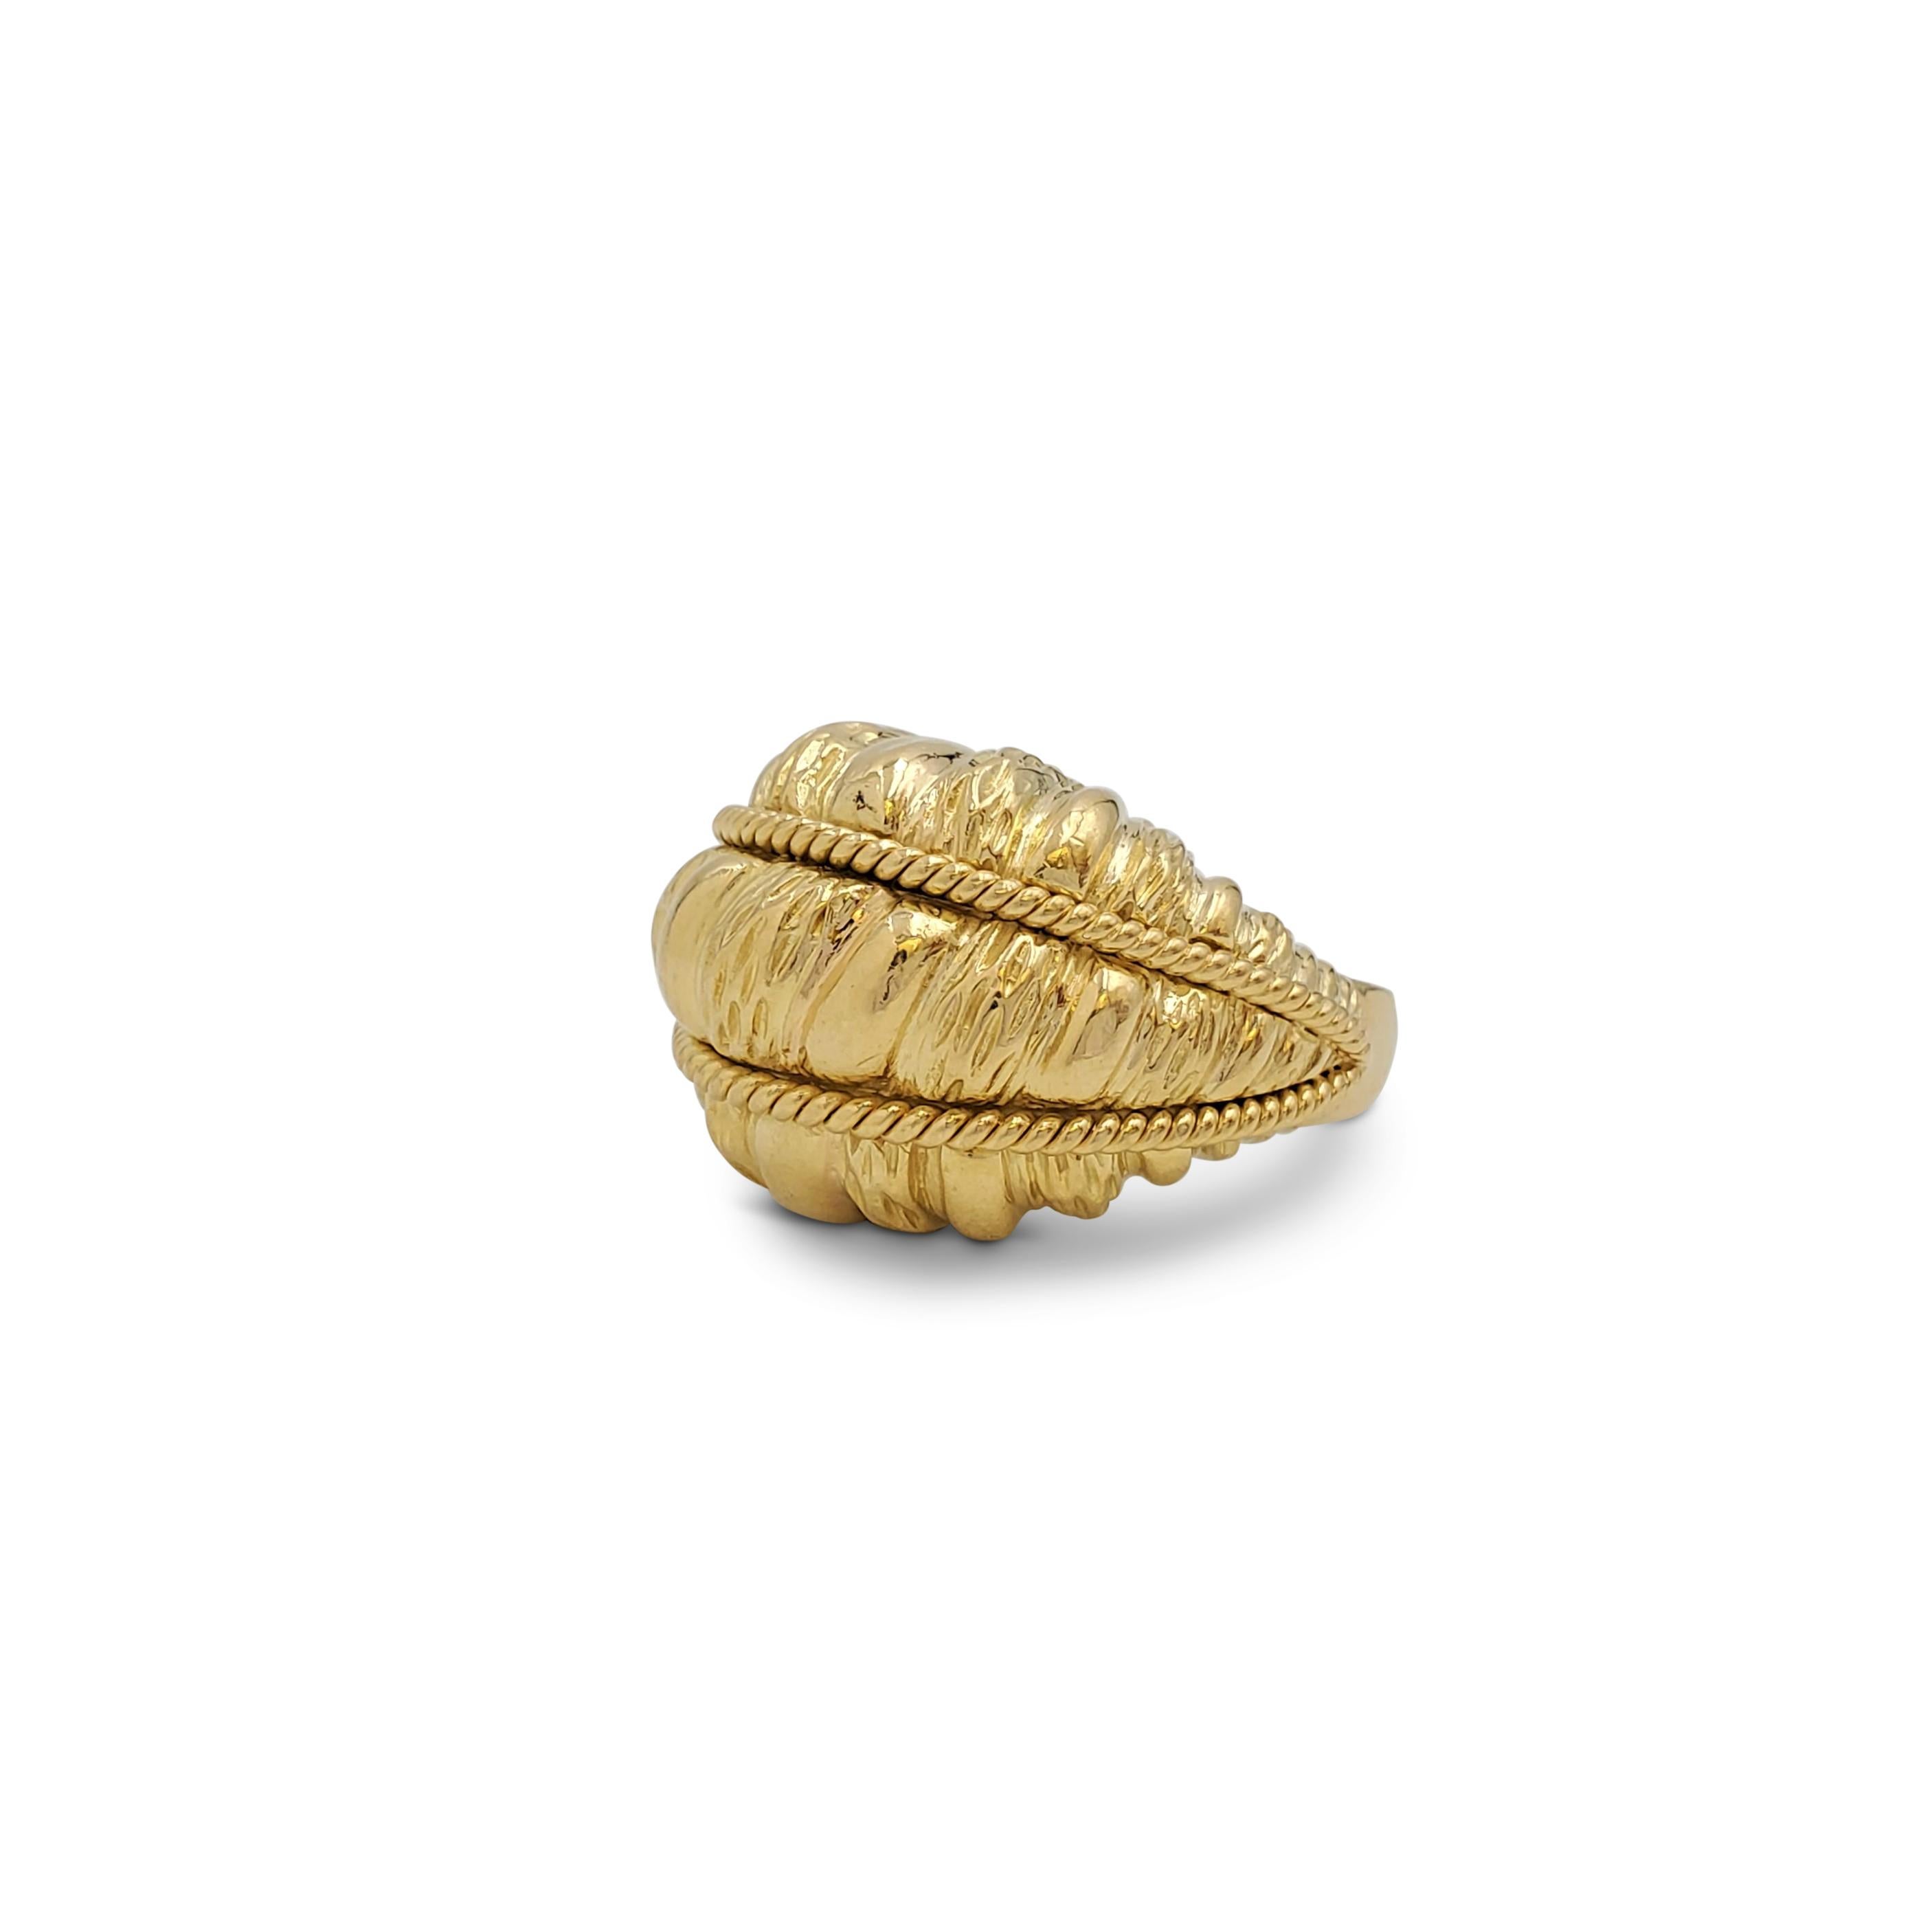 A groovy dome-shaped cocktail ring crafted in 18 karat textured yellow gold with contrasting rope detail. Marked 18K. The ring is not presented with the original box or papers. CIRCA 1970s. 

Ring Size: US 8
Box: No
Papers: No